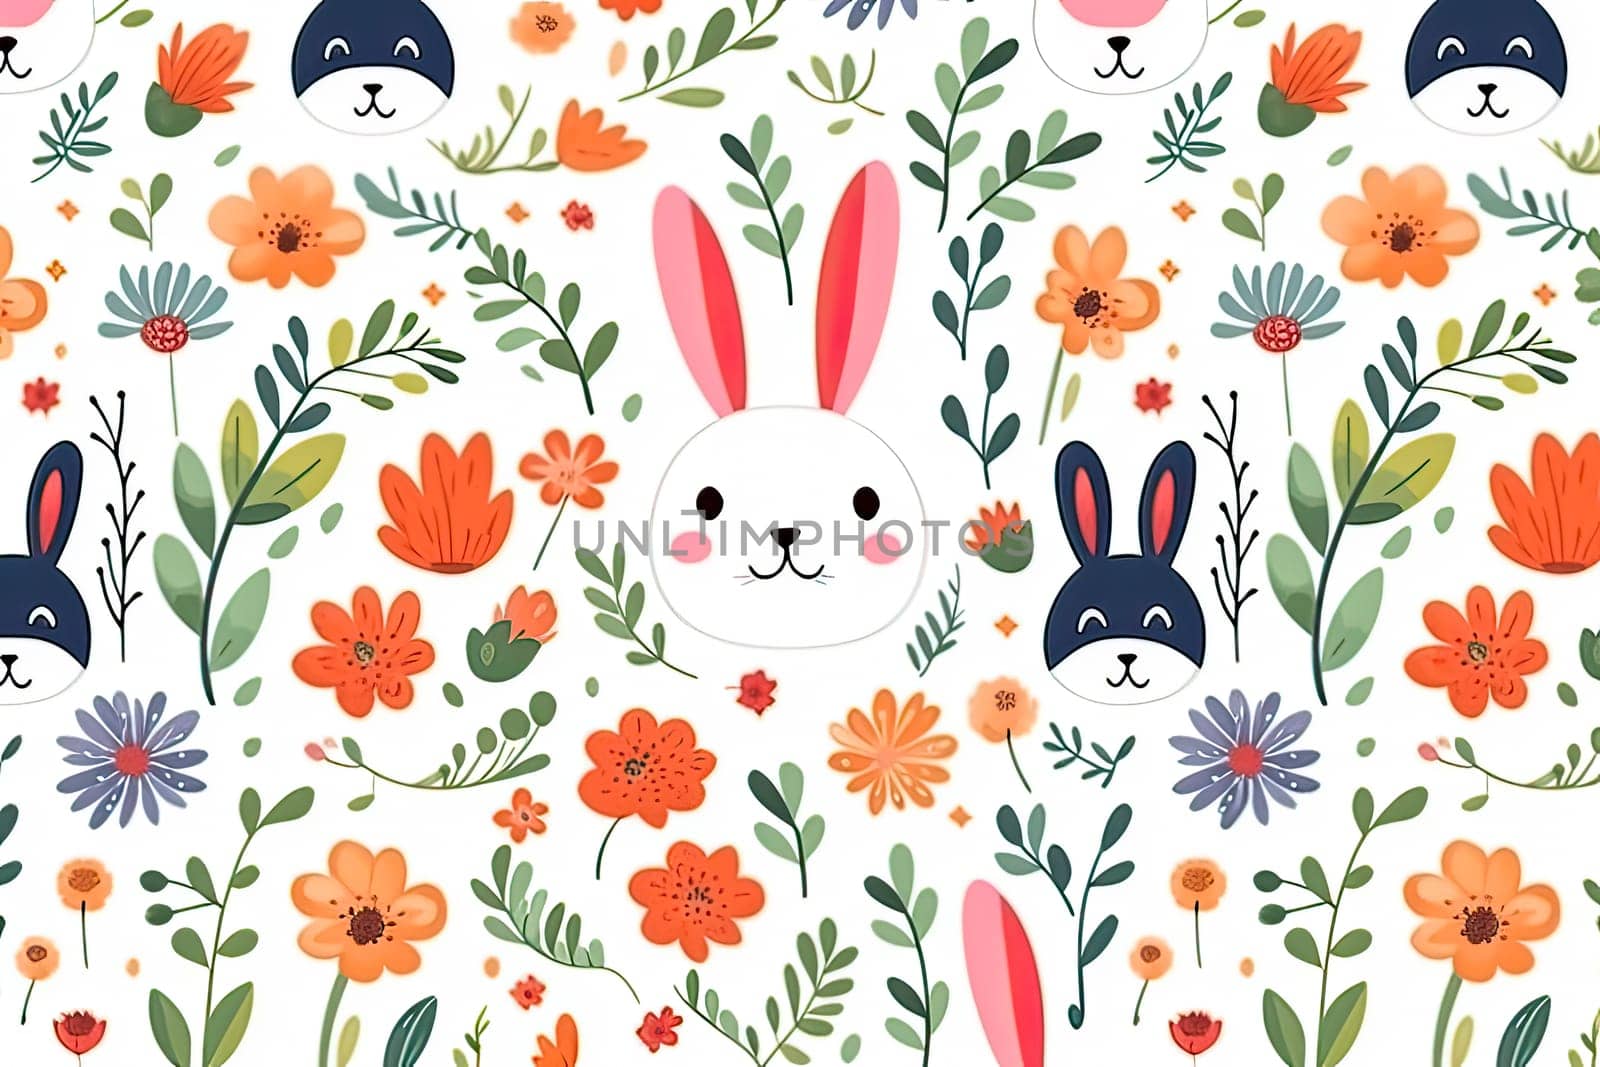 Vibrant watercolor illustration showcasing adorable rabbits surrounded by blooming flowers, ideal for Easter themed designs and decorations.